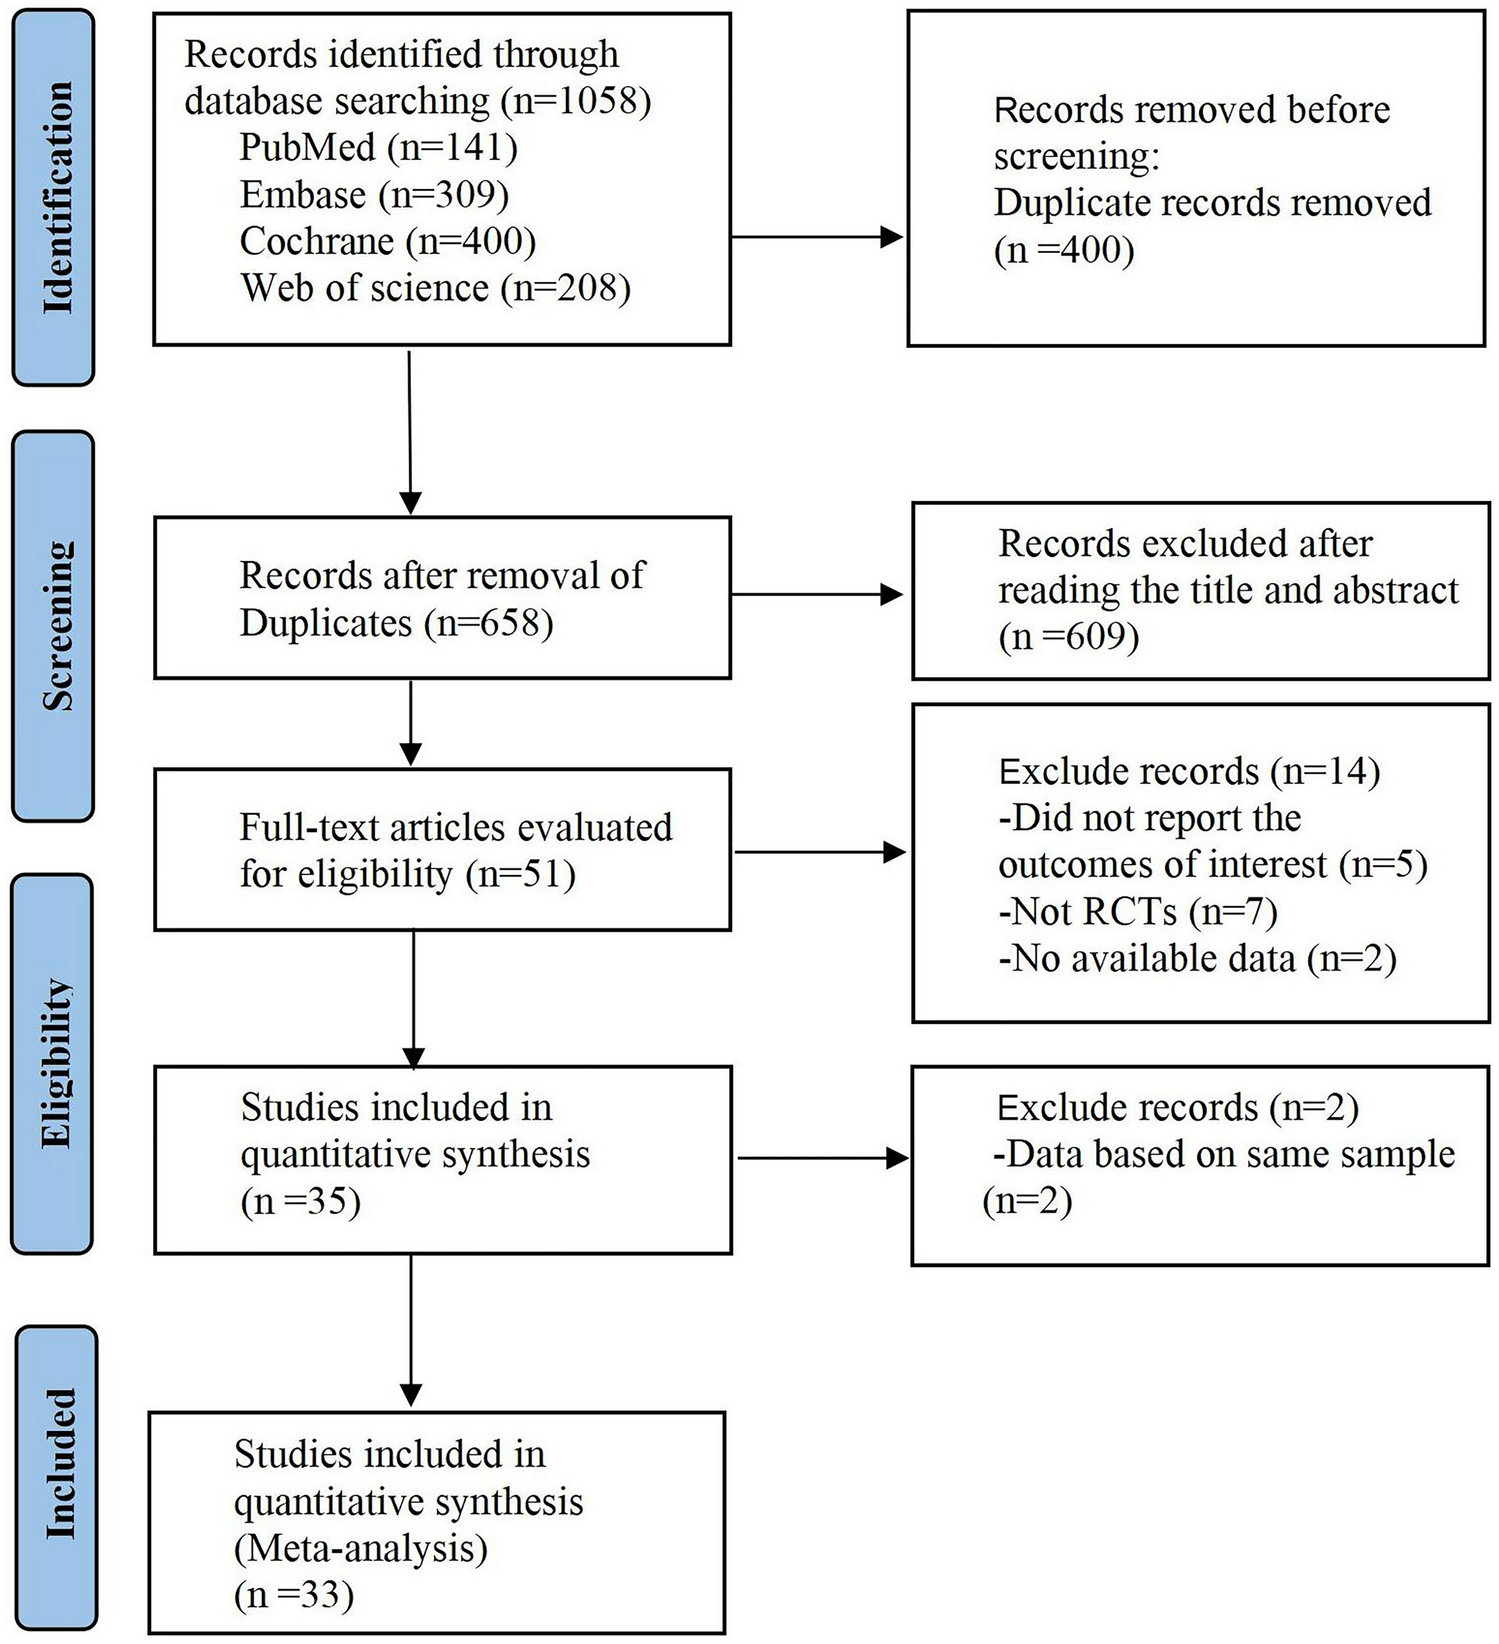 Comparative Efficacy and Safety of Monoclonal Antibodies for Cognitive Decline in Patients with Alzheimer’s Disease: A Systematic Review and Network Meta-Analysis